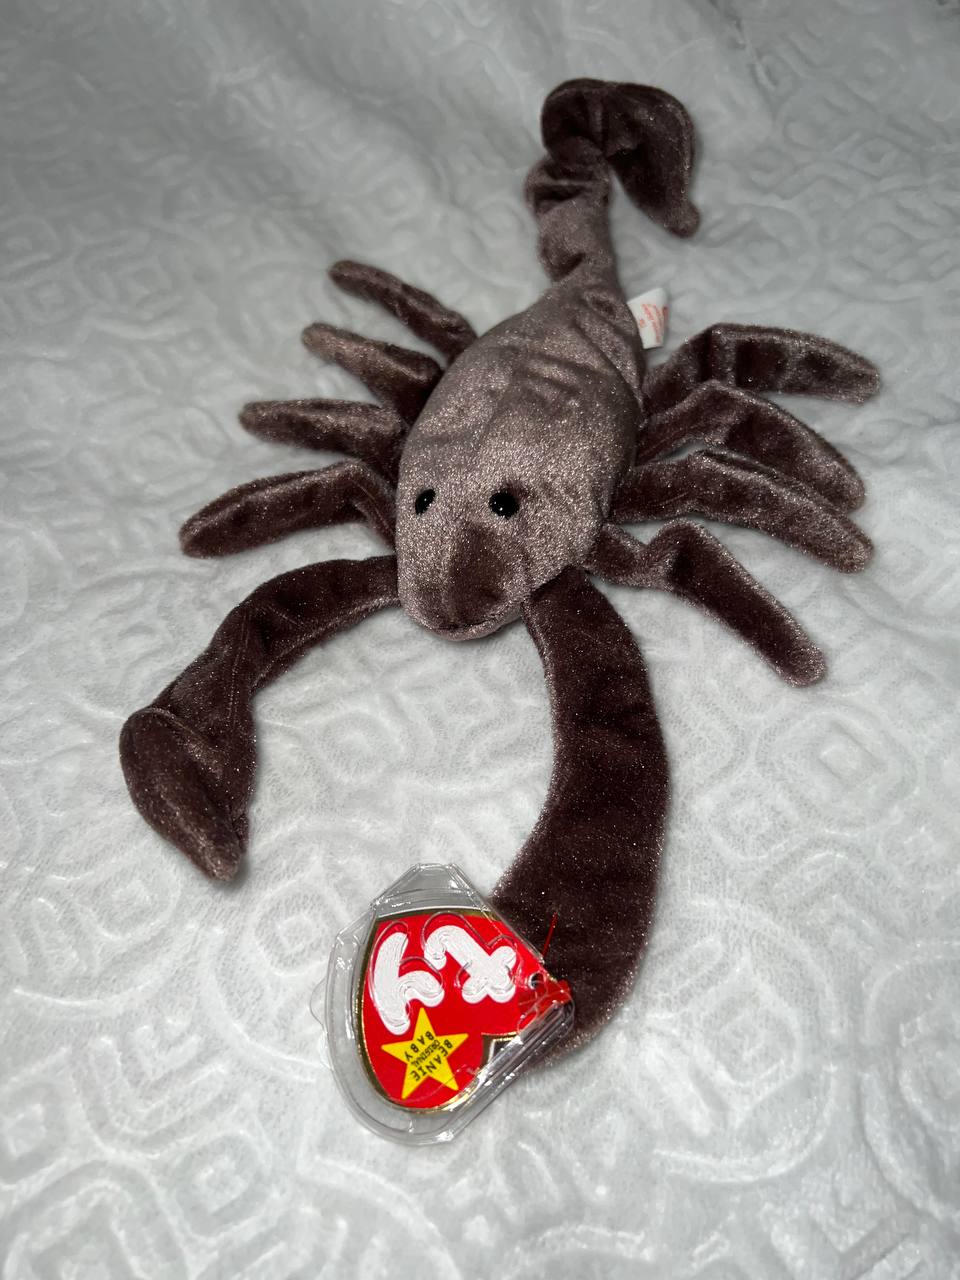 *RARE* MINT Stinger Beanie Baby 1997 With Tag